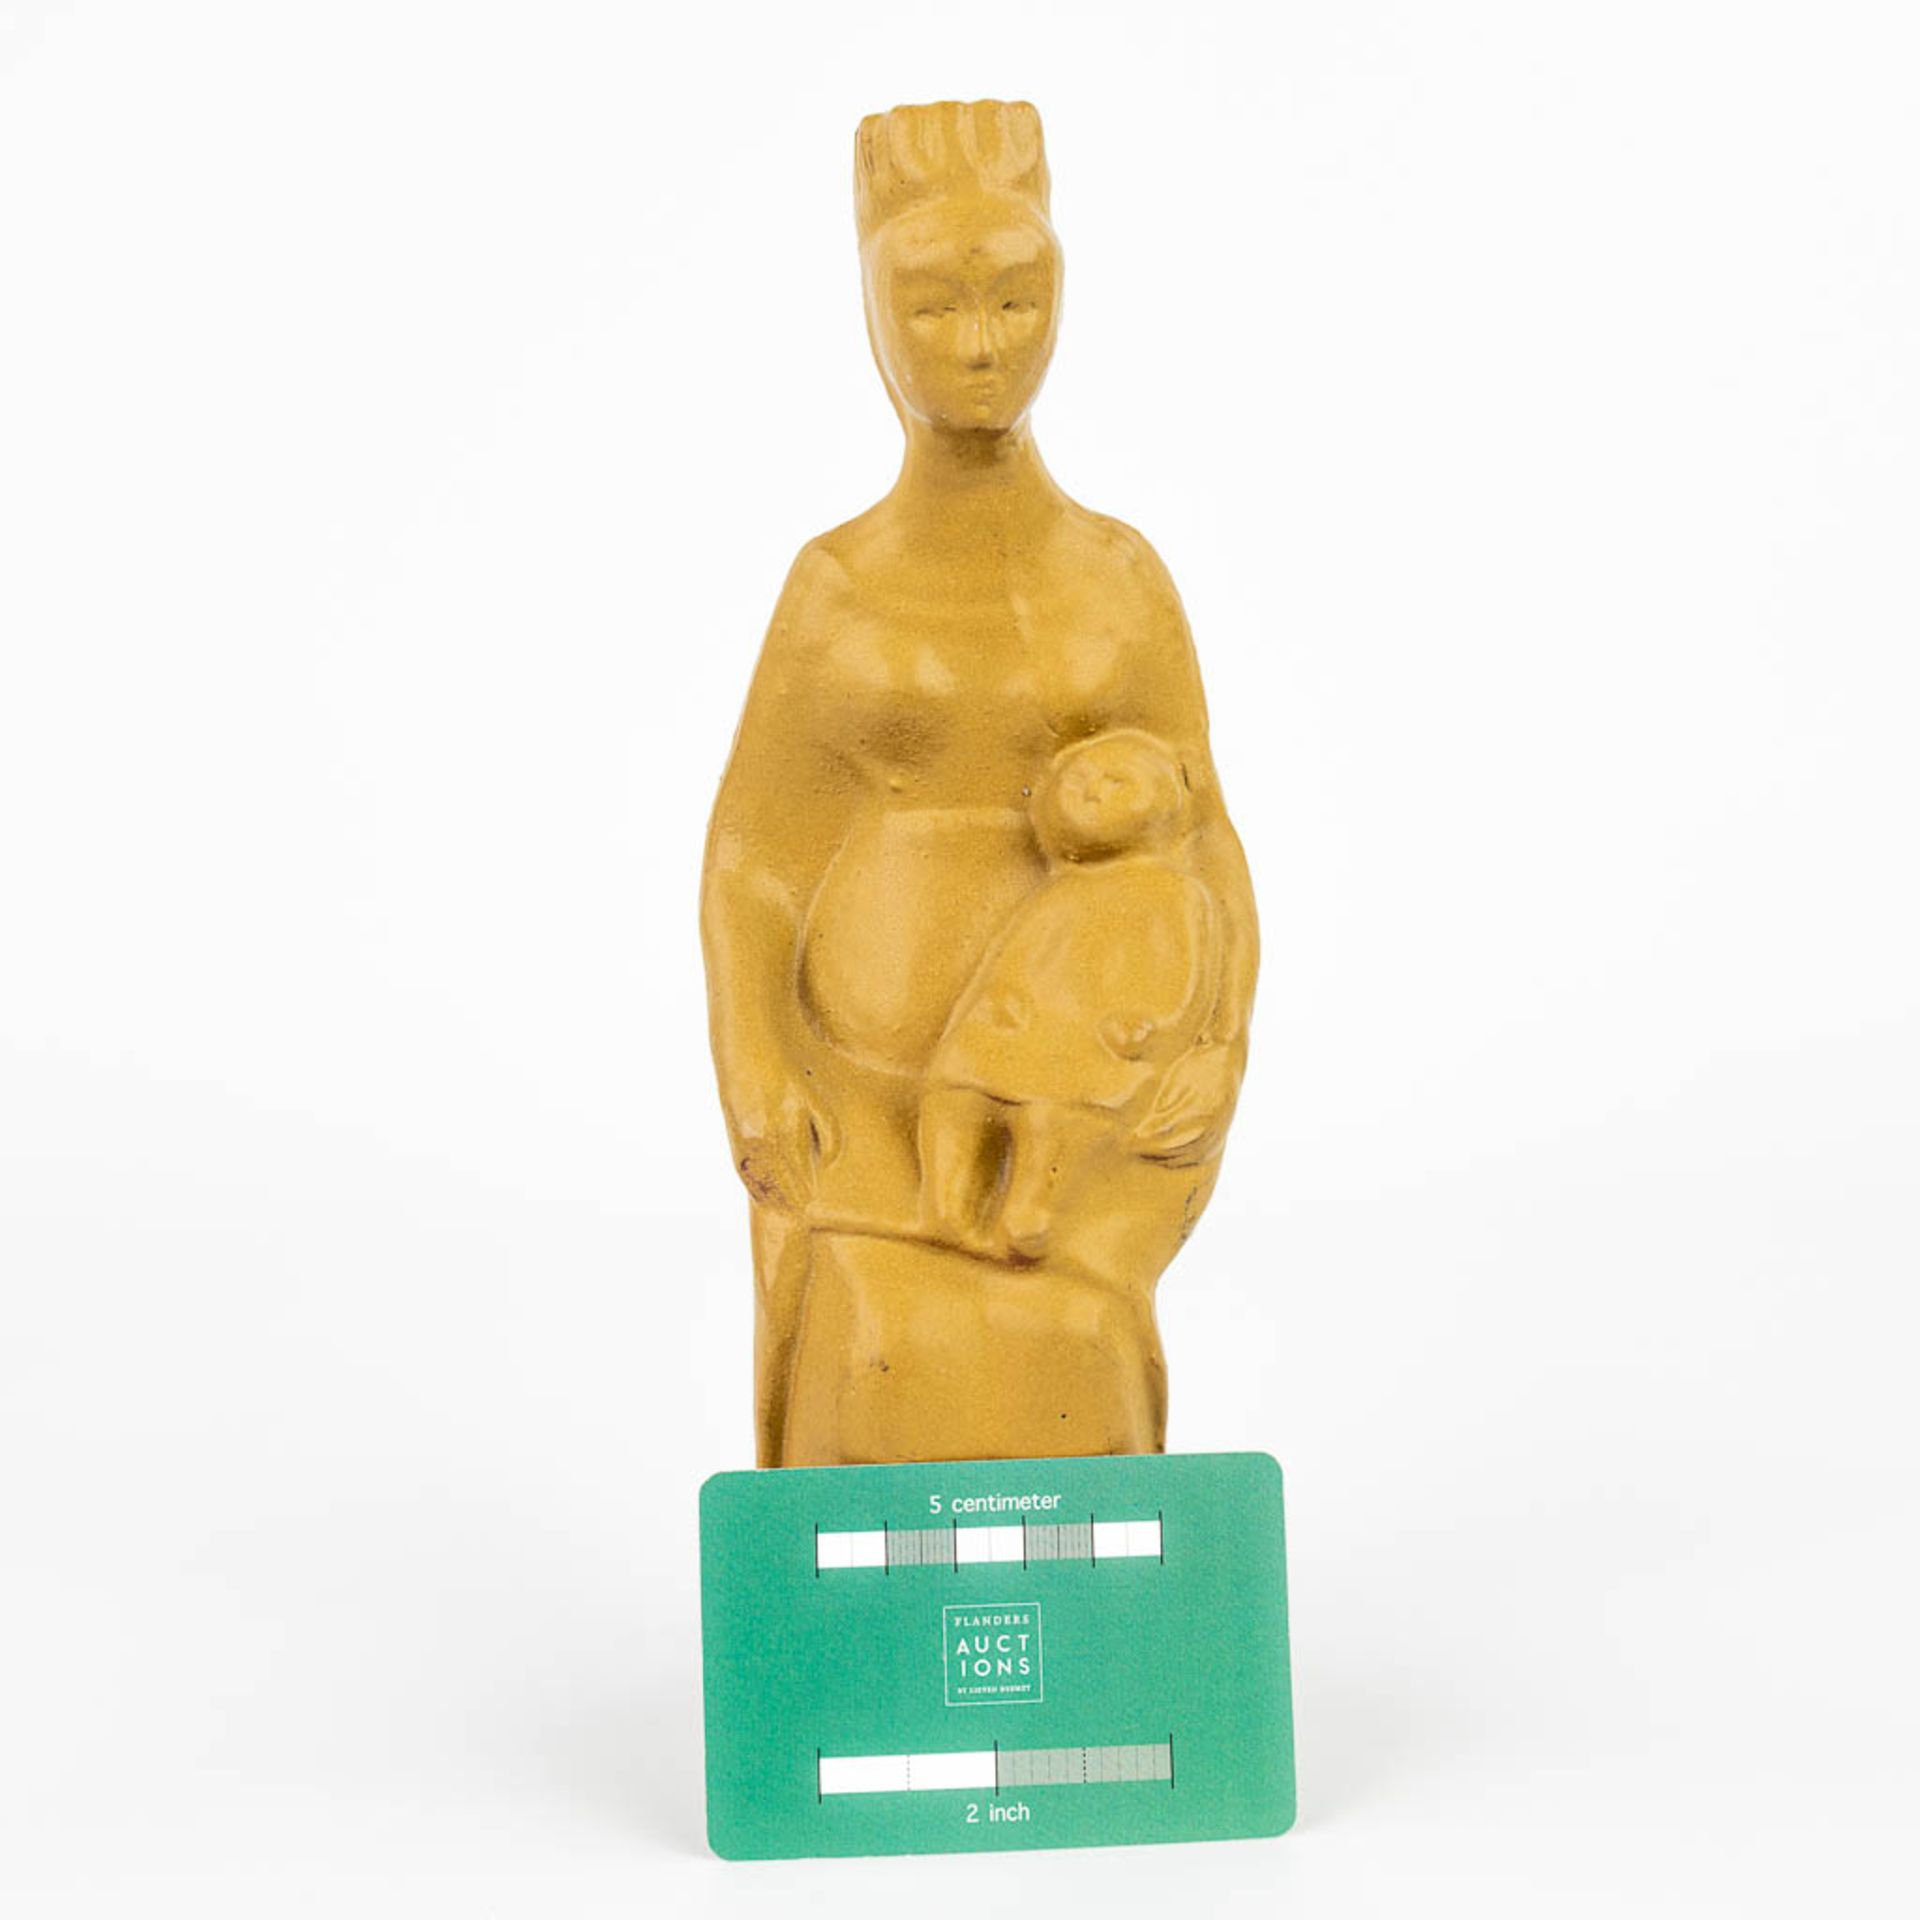 A statue of Madonna with a child made by Perignem. (H:25cm) - Image 4 of 10